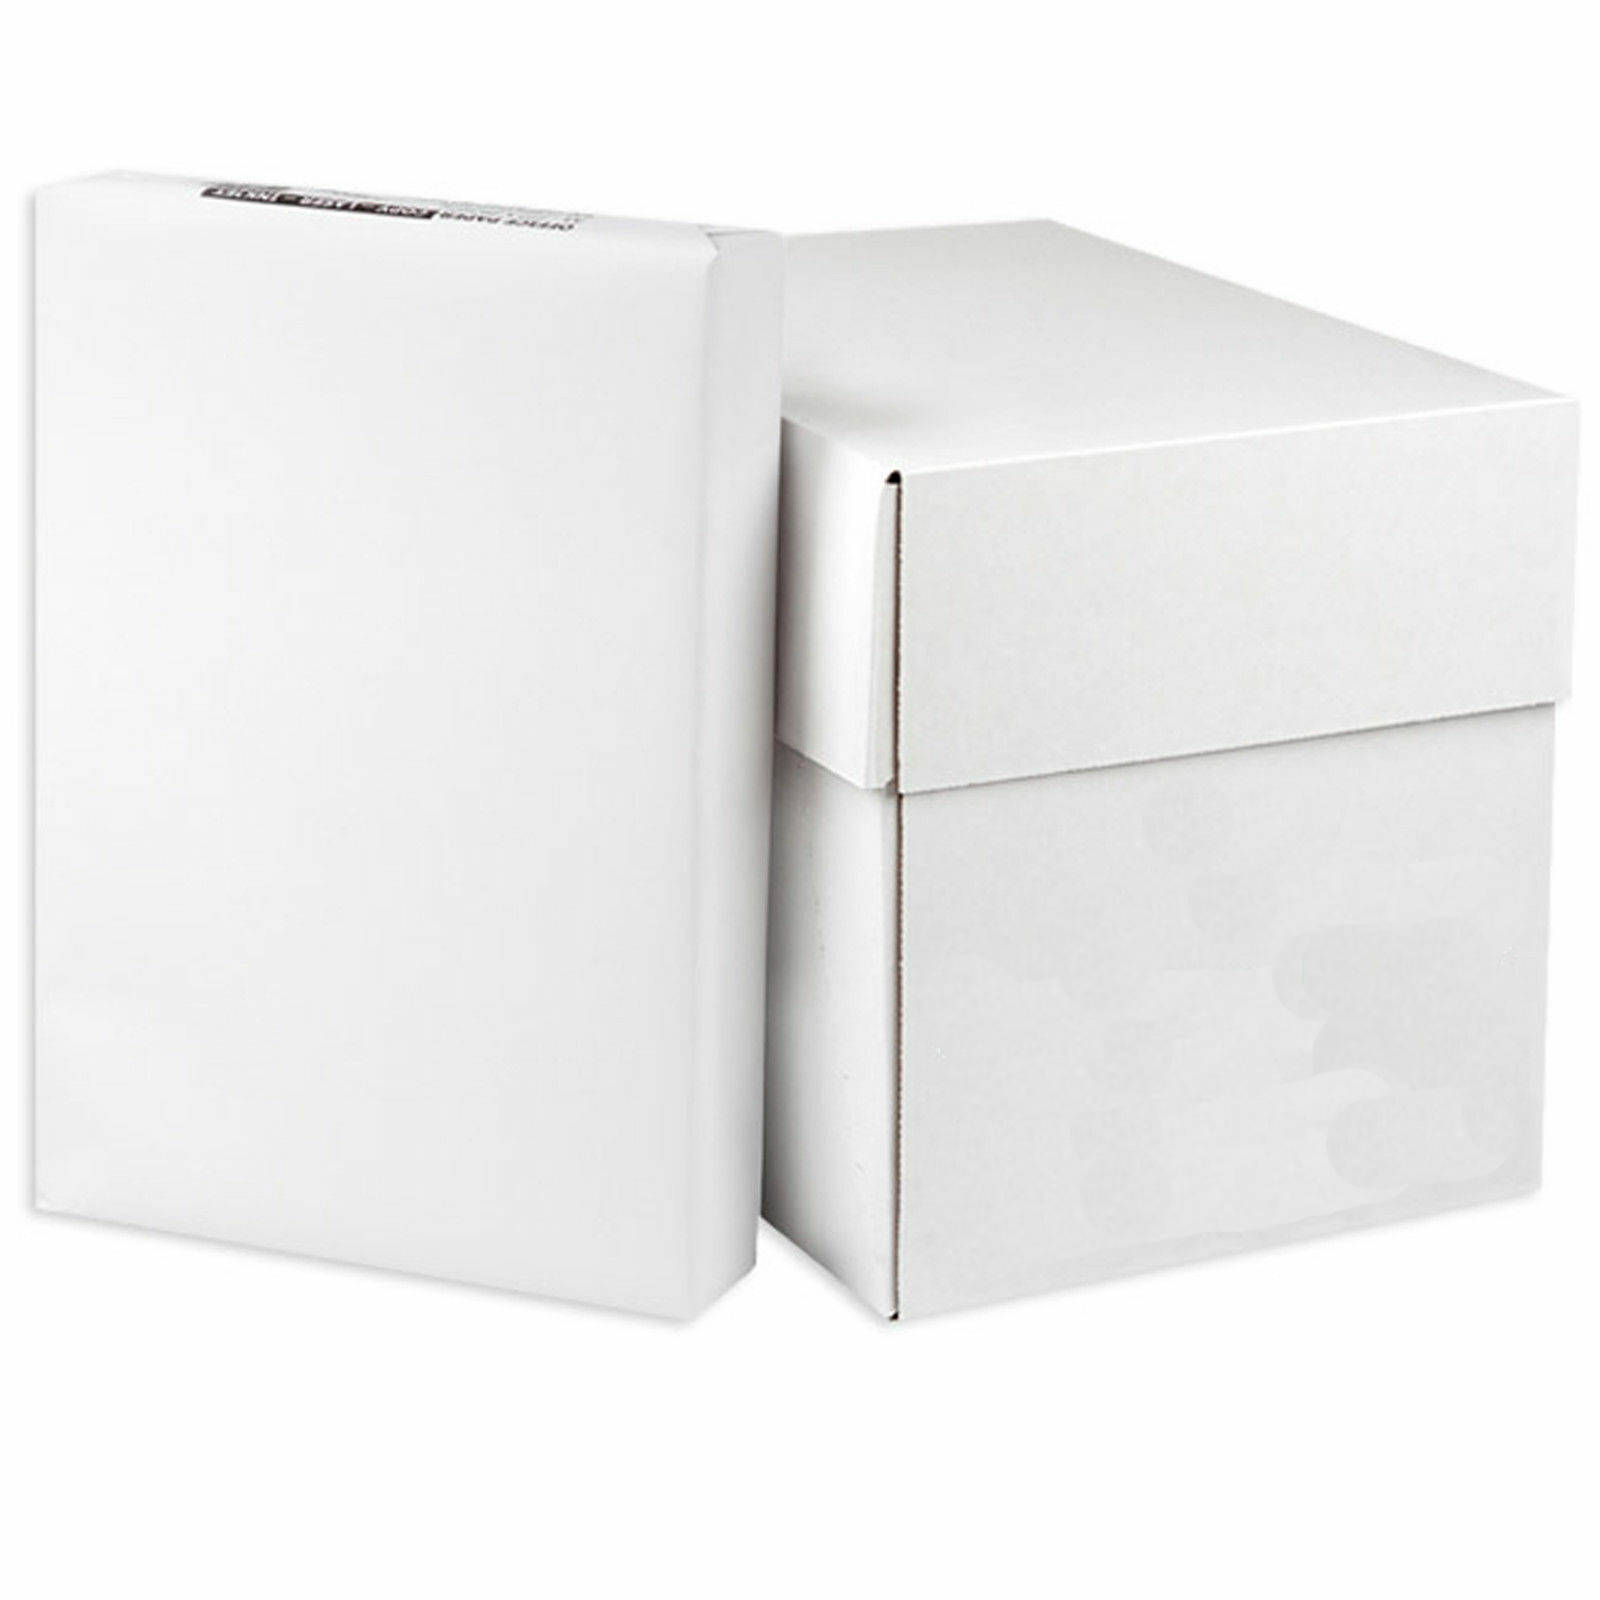 Everyday Paper A4 75gsm White 10 Reams (2 Boxes of 5 Reams)